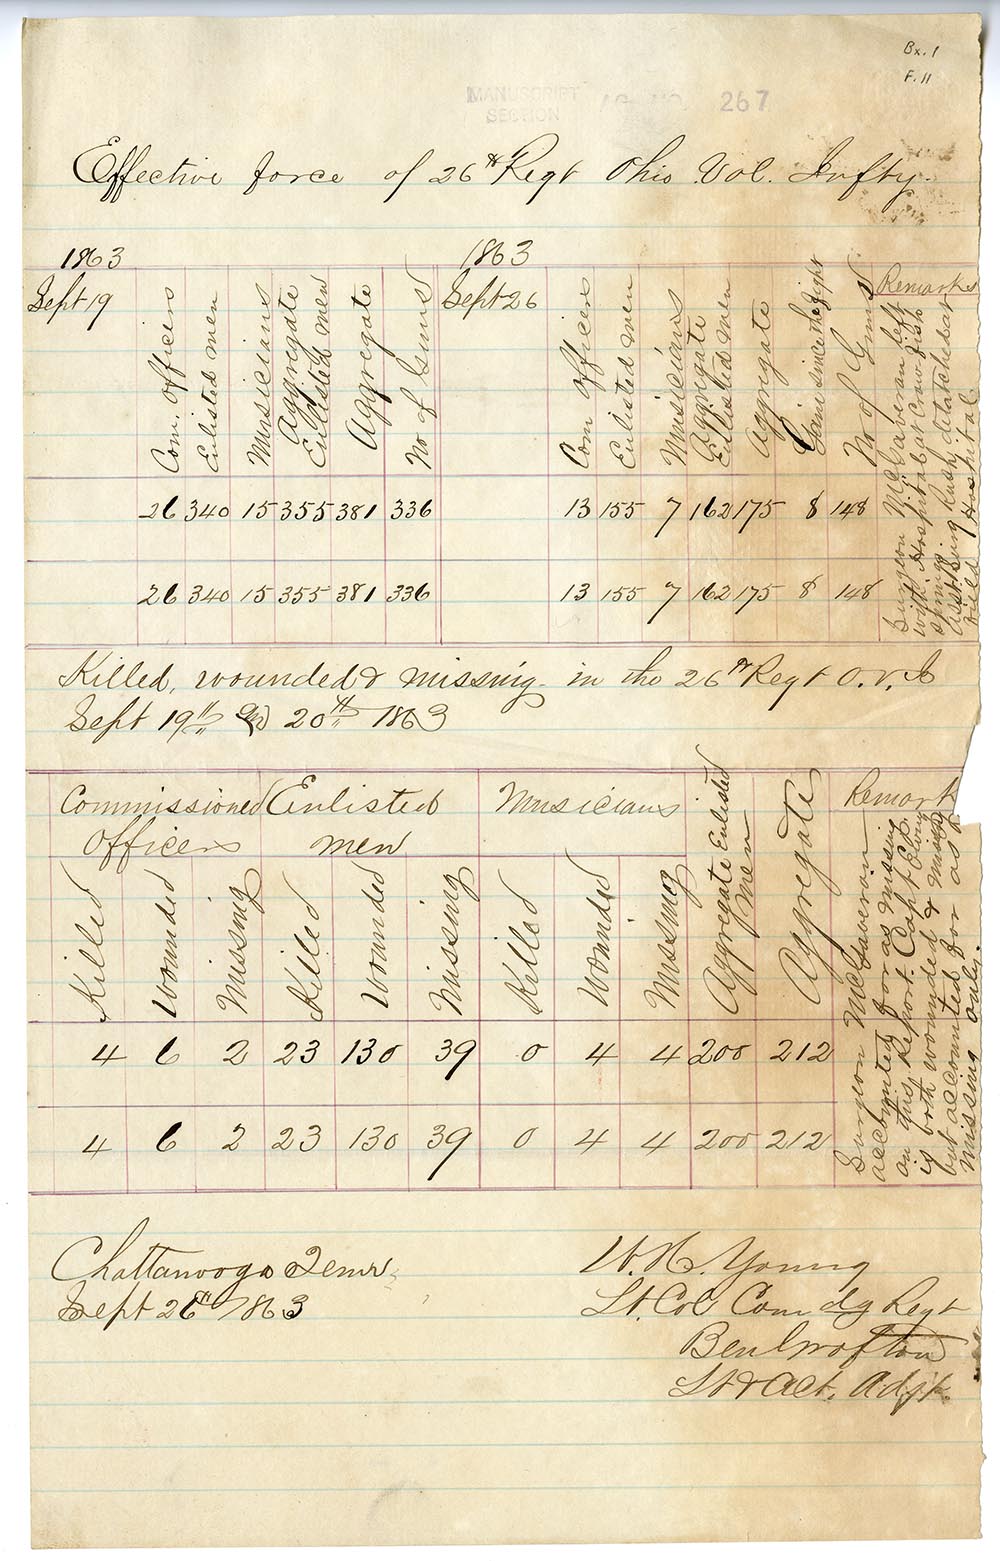 Report of the killed, wounded, and missing of the 26th Ohio Volunteer Infantry at the Battle of Chickamauga